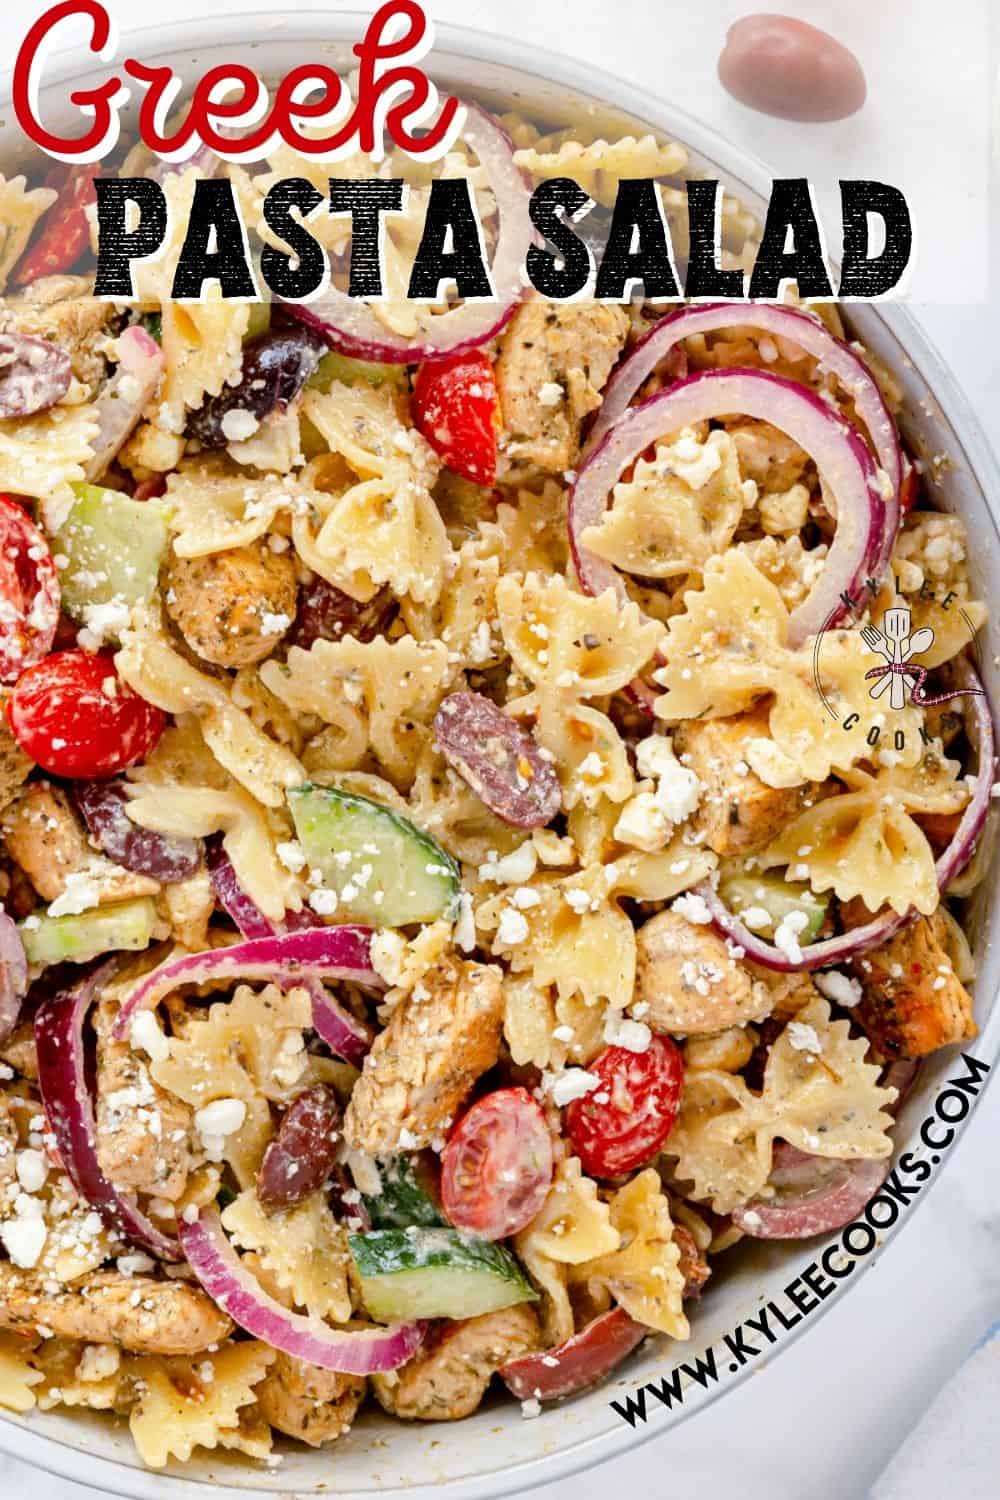 greek pasta salad with text overlaid